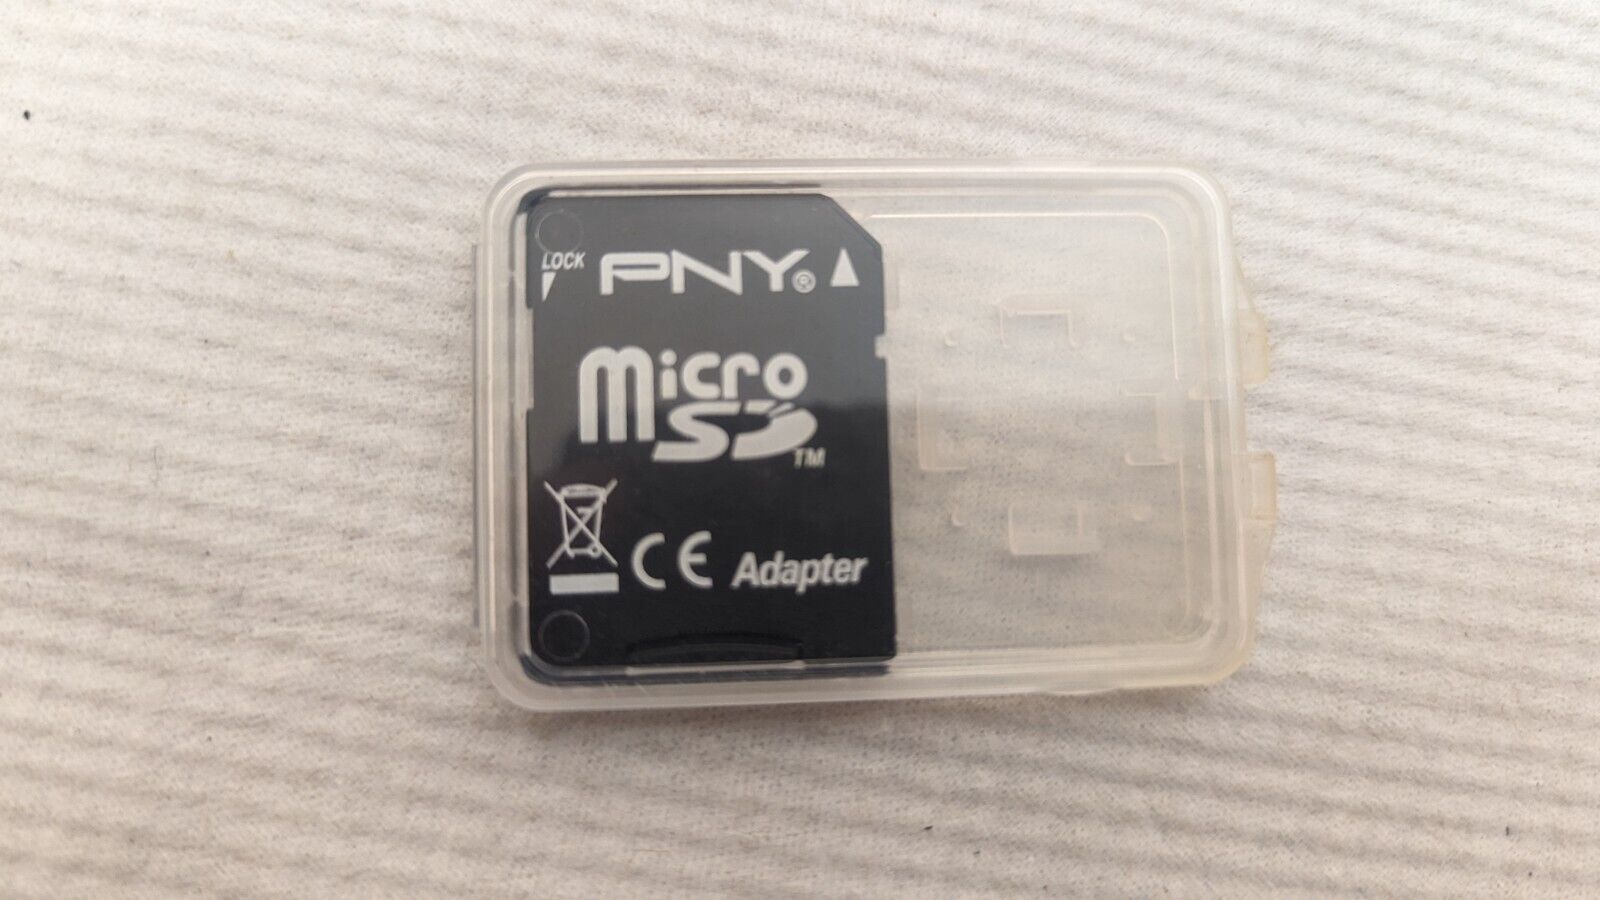 PNY Micro SD microSD 8gb Formatted Ready to use Data storage chip tested works